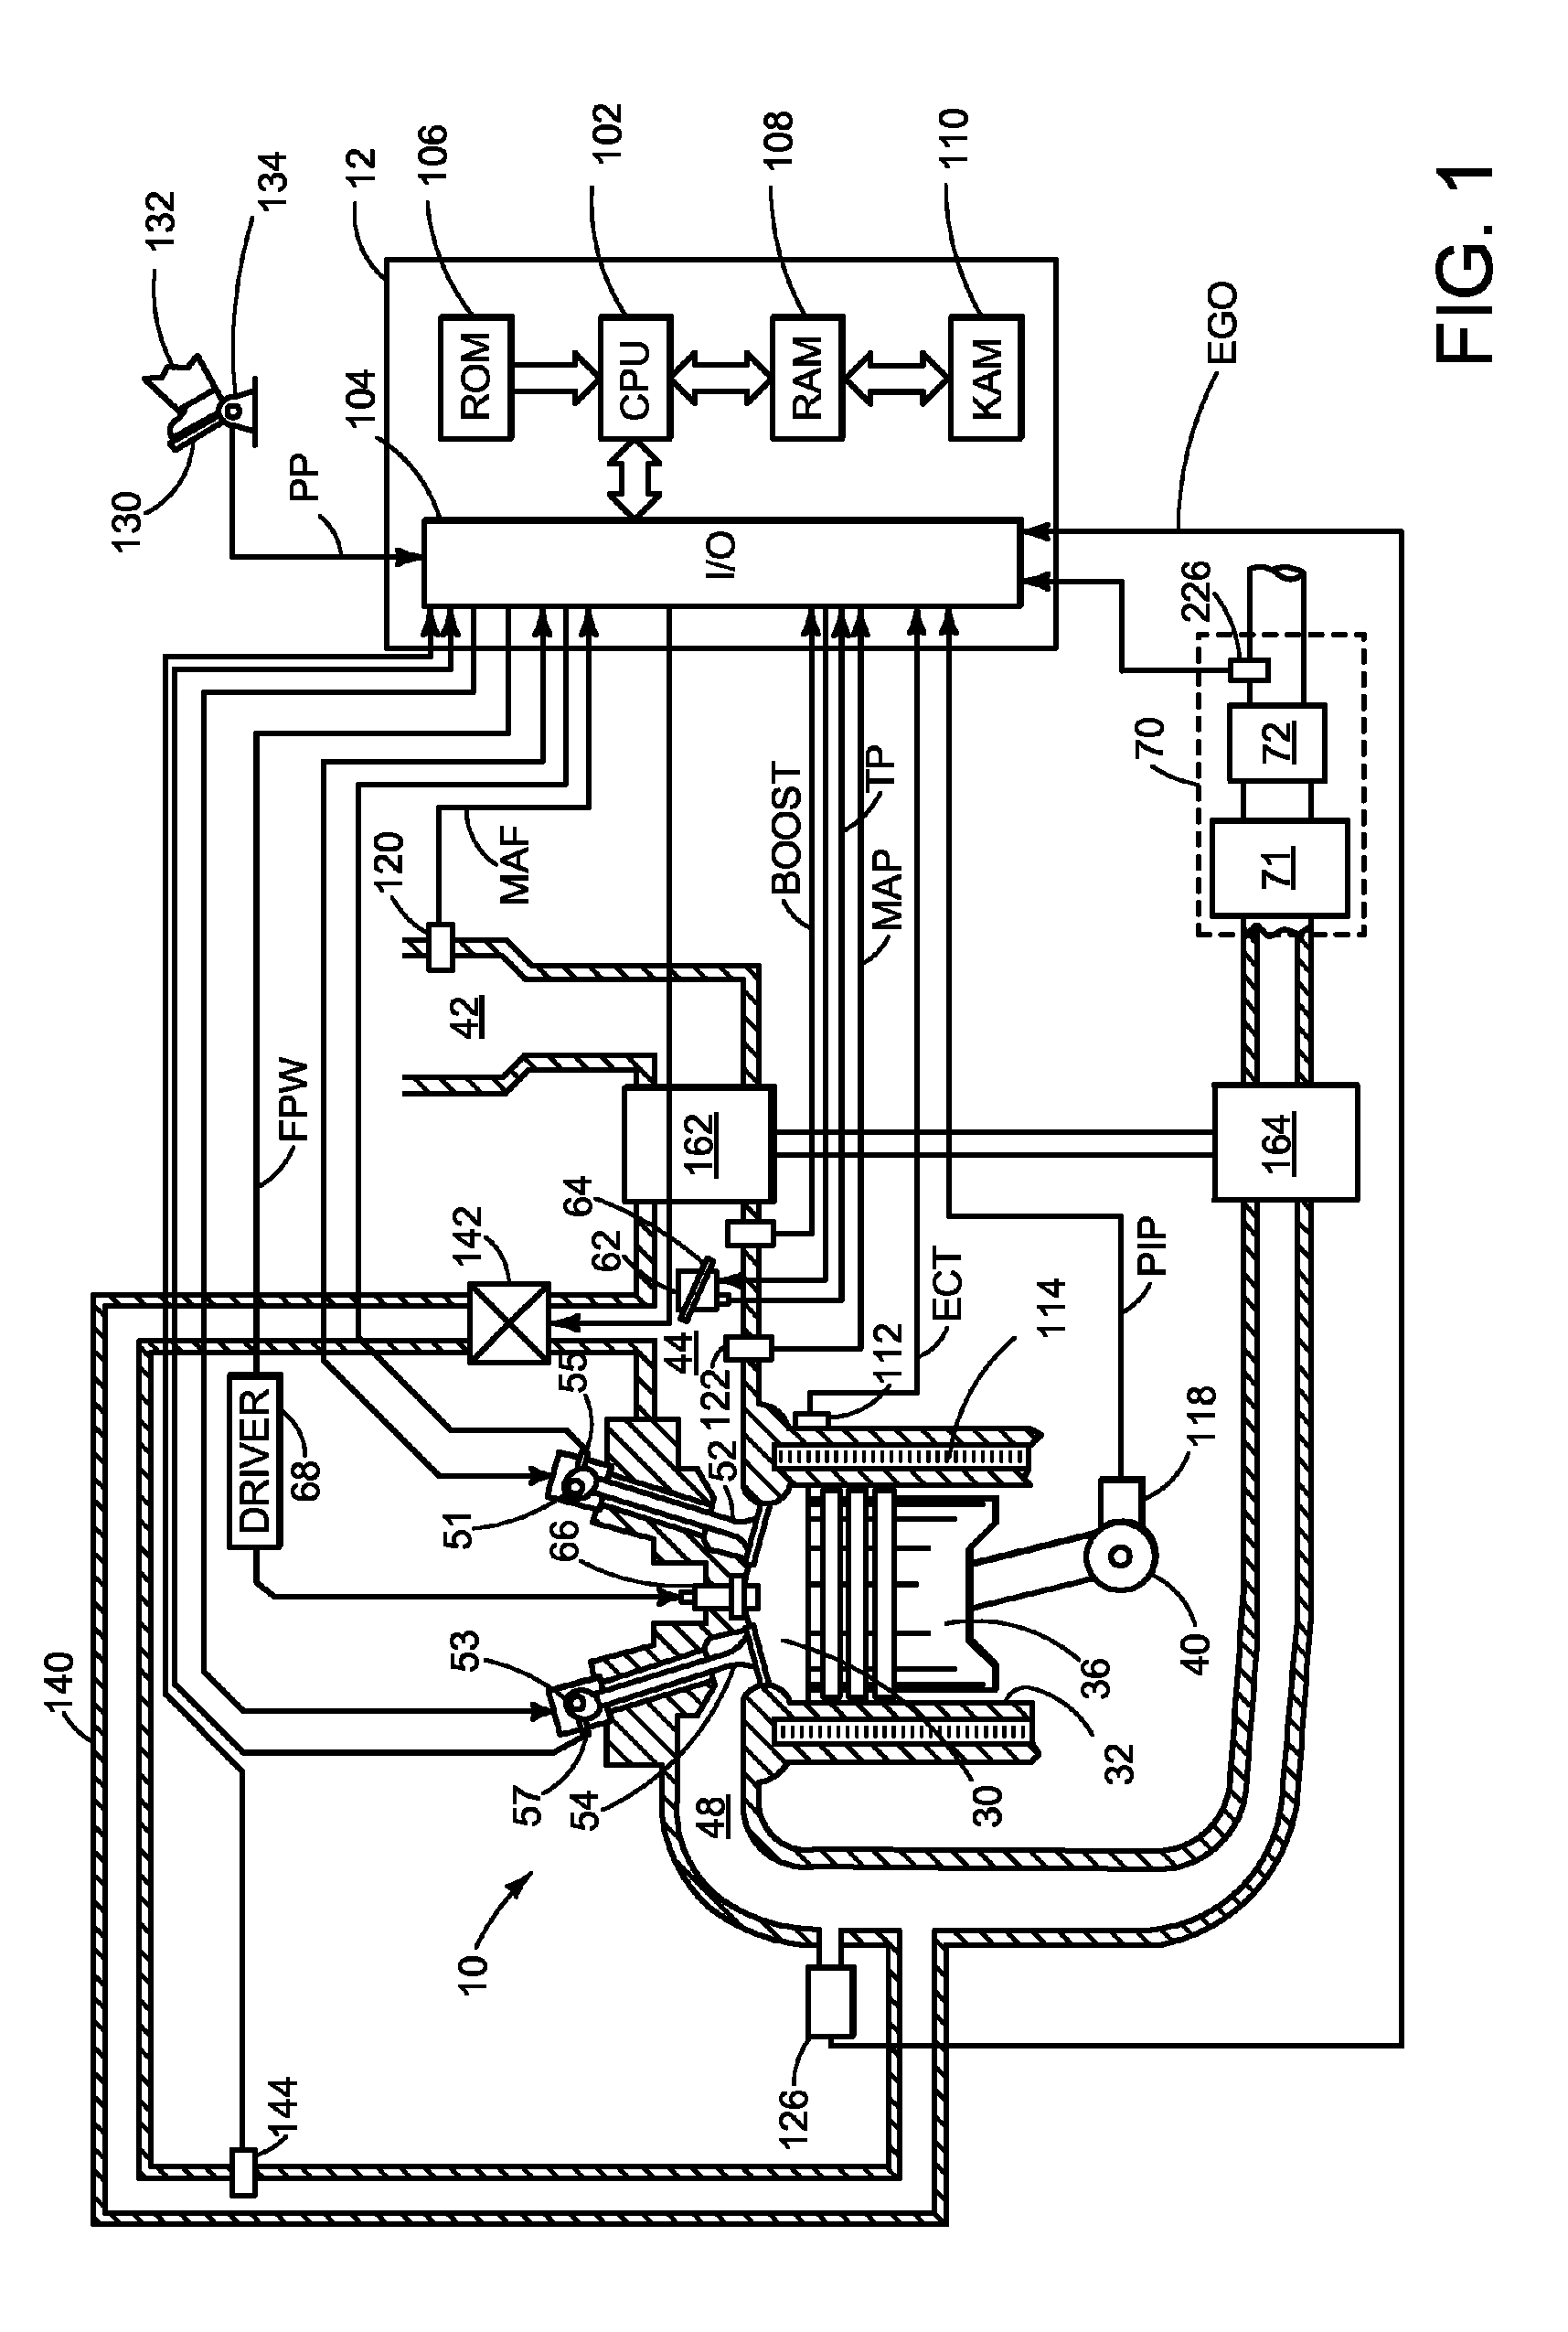 Emission control with a particulate matter sensor